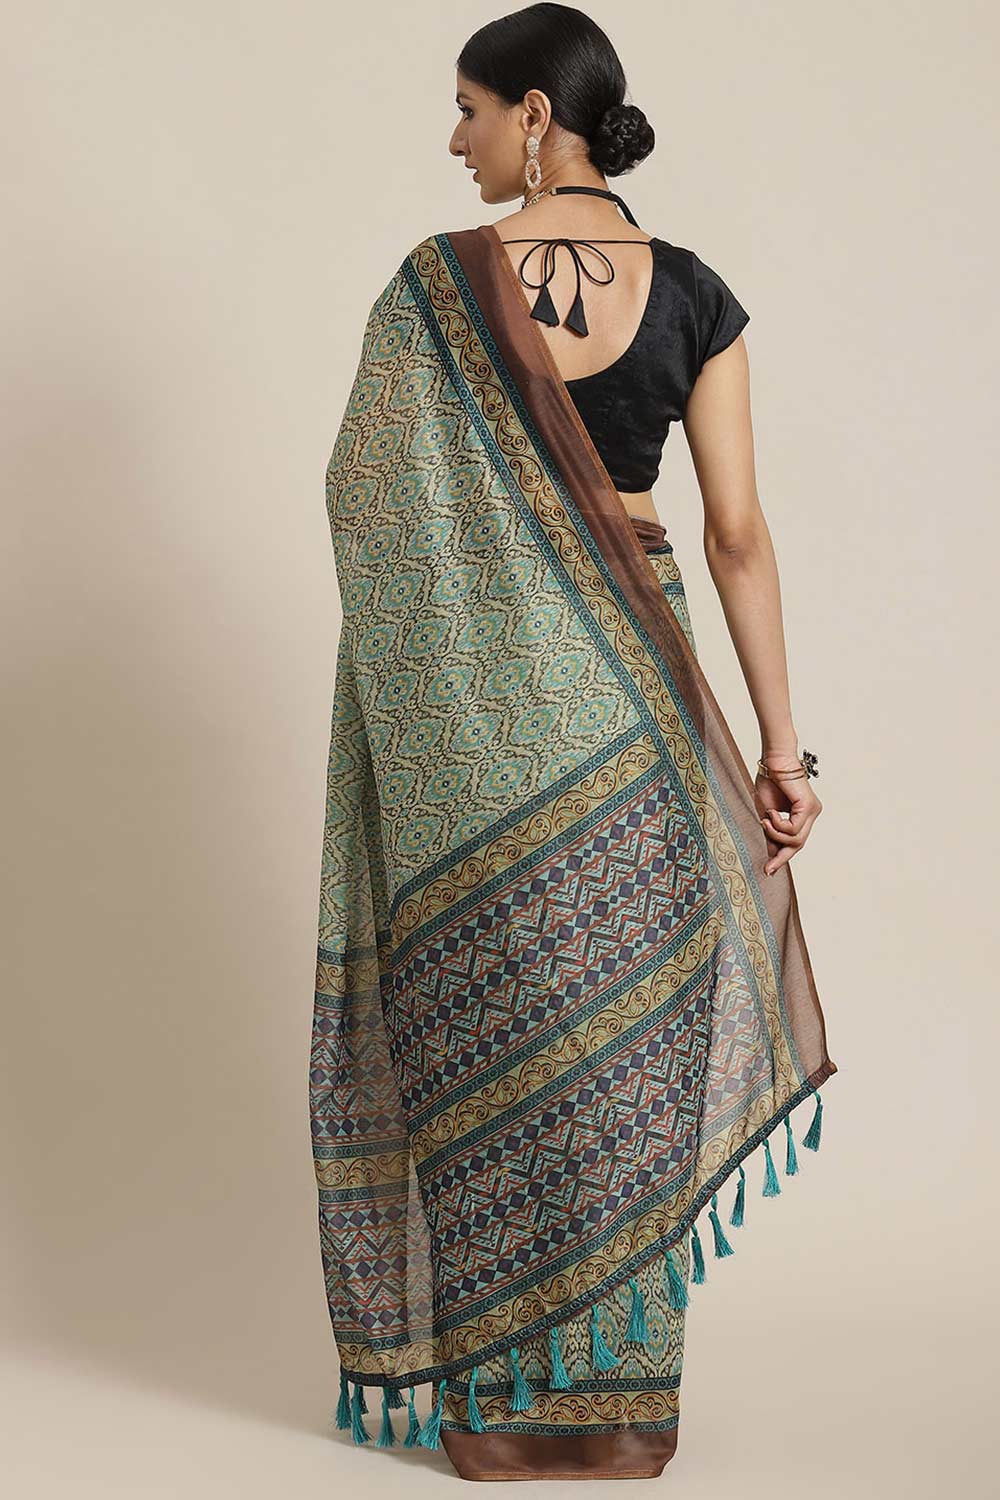 Shop Nora Green Cotton Block Printed One Minute Saree at best offer at our  Store - One Minute Saree